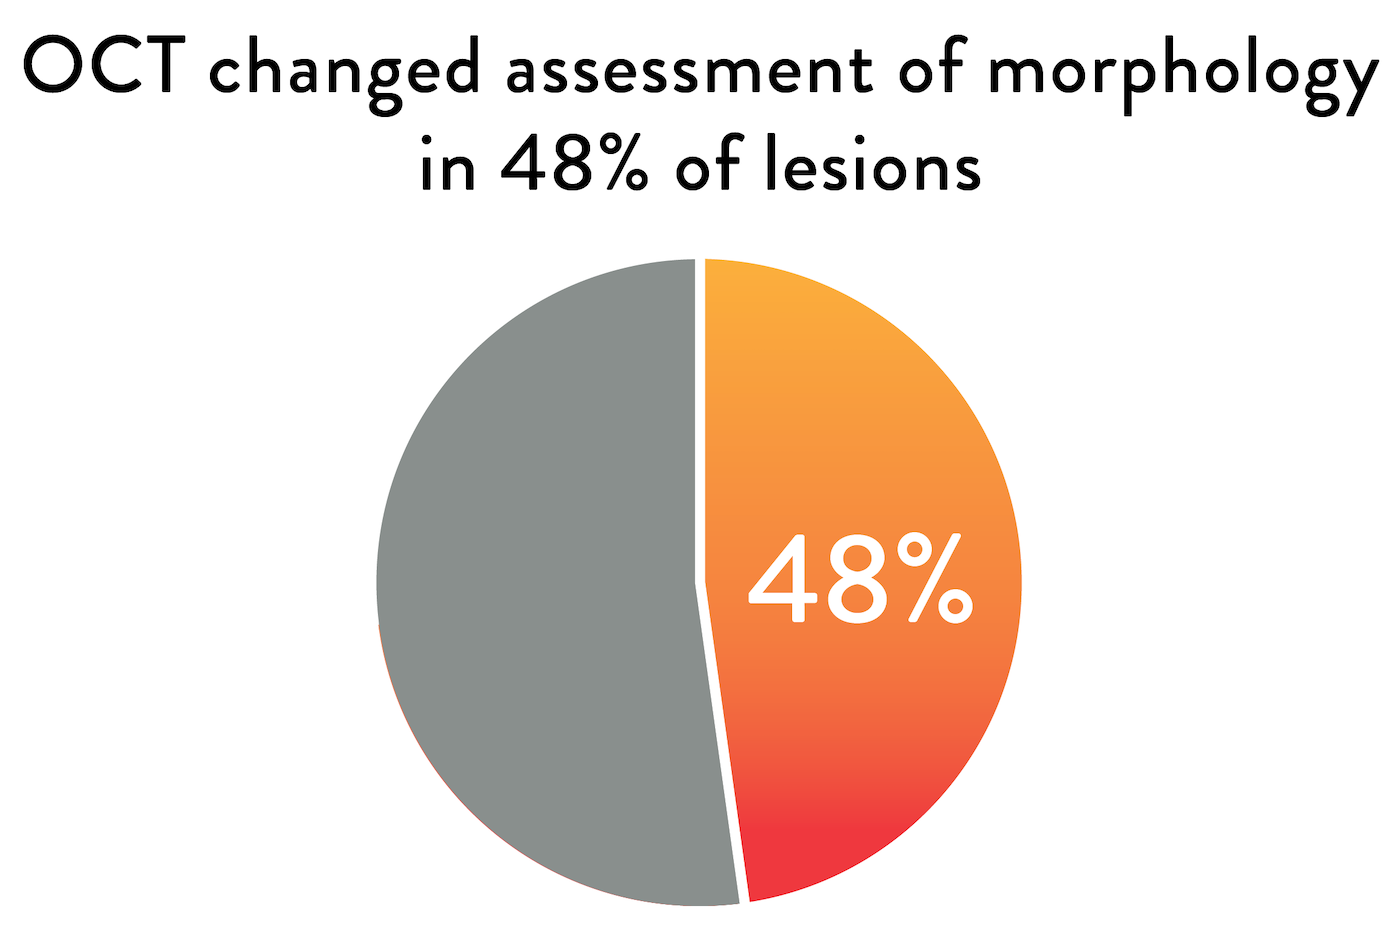  OCT changed assessment of morphology in fourty eight percent of lesions